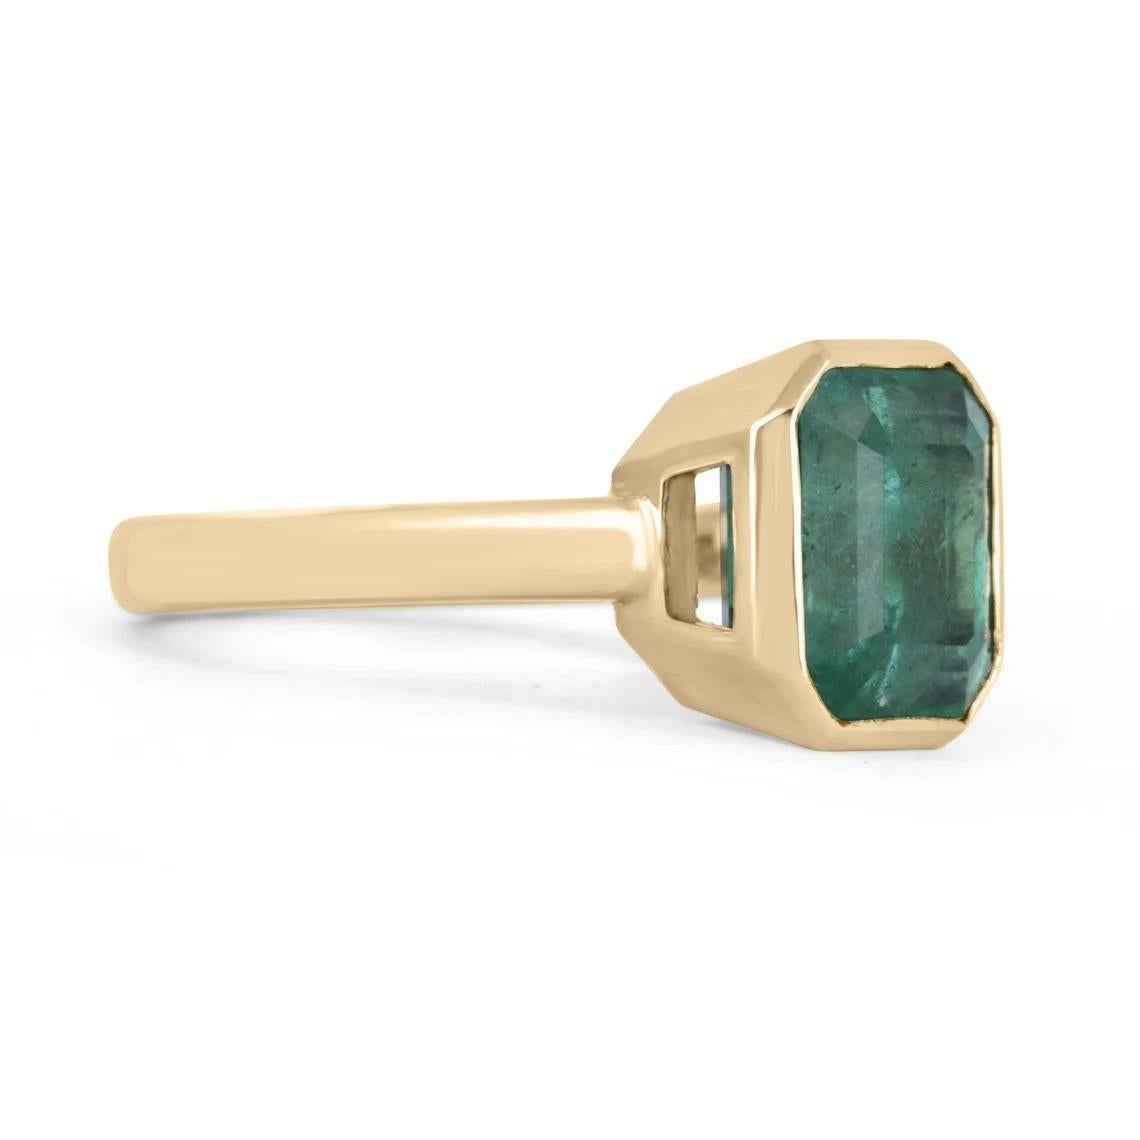 Displayed is a rich vibrant green emerald, solitaire, Asscher-cut bezel ring in solid 14K yellow gold. This gorgeous solitaire ring carries a full 3.17-carat EARTH MINED emerald in a sleek and secure bezel setting. The emerald has incredible